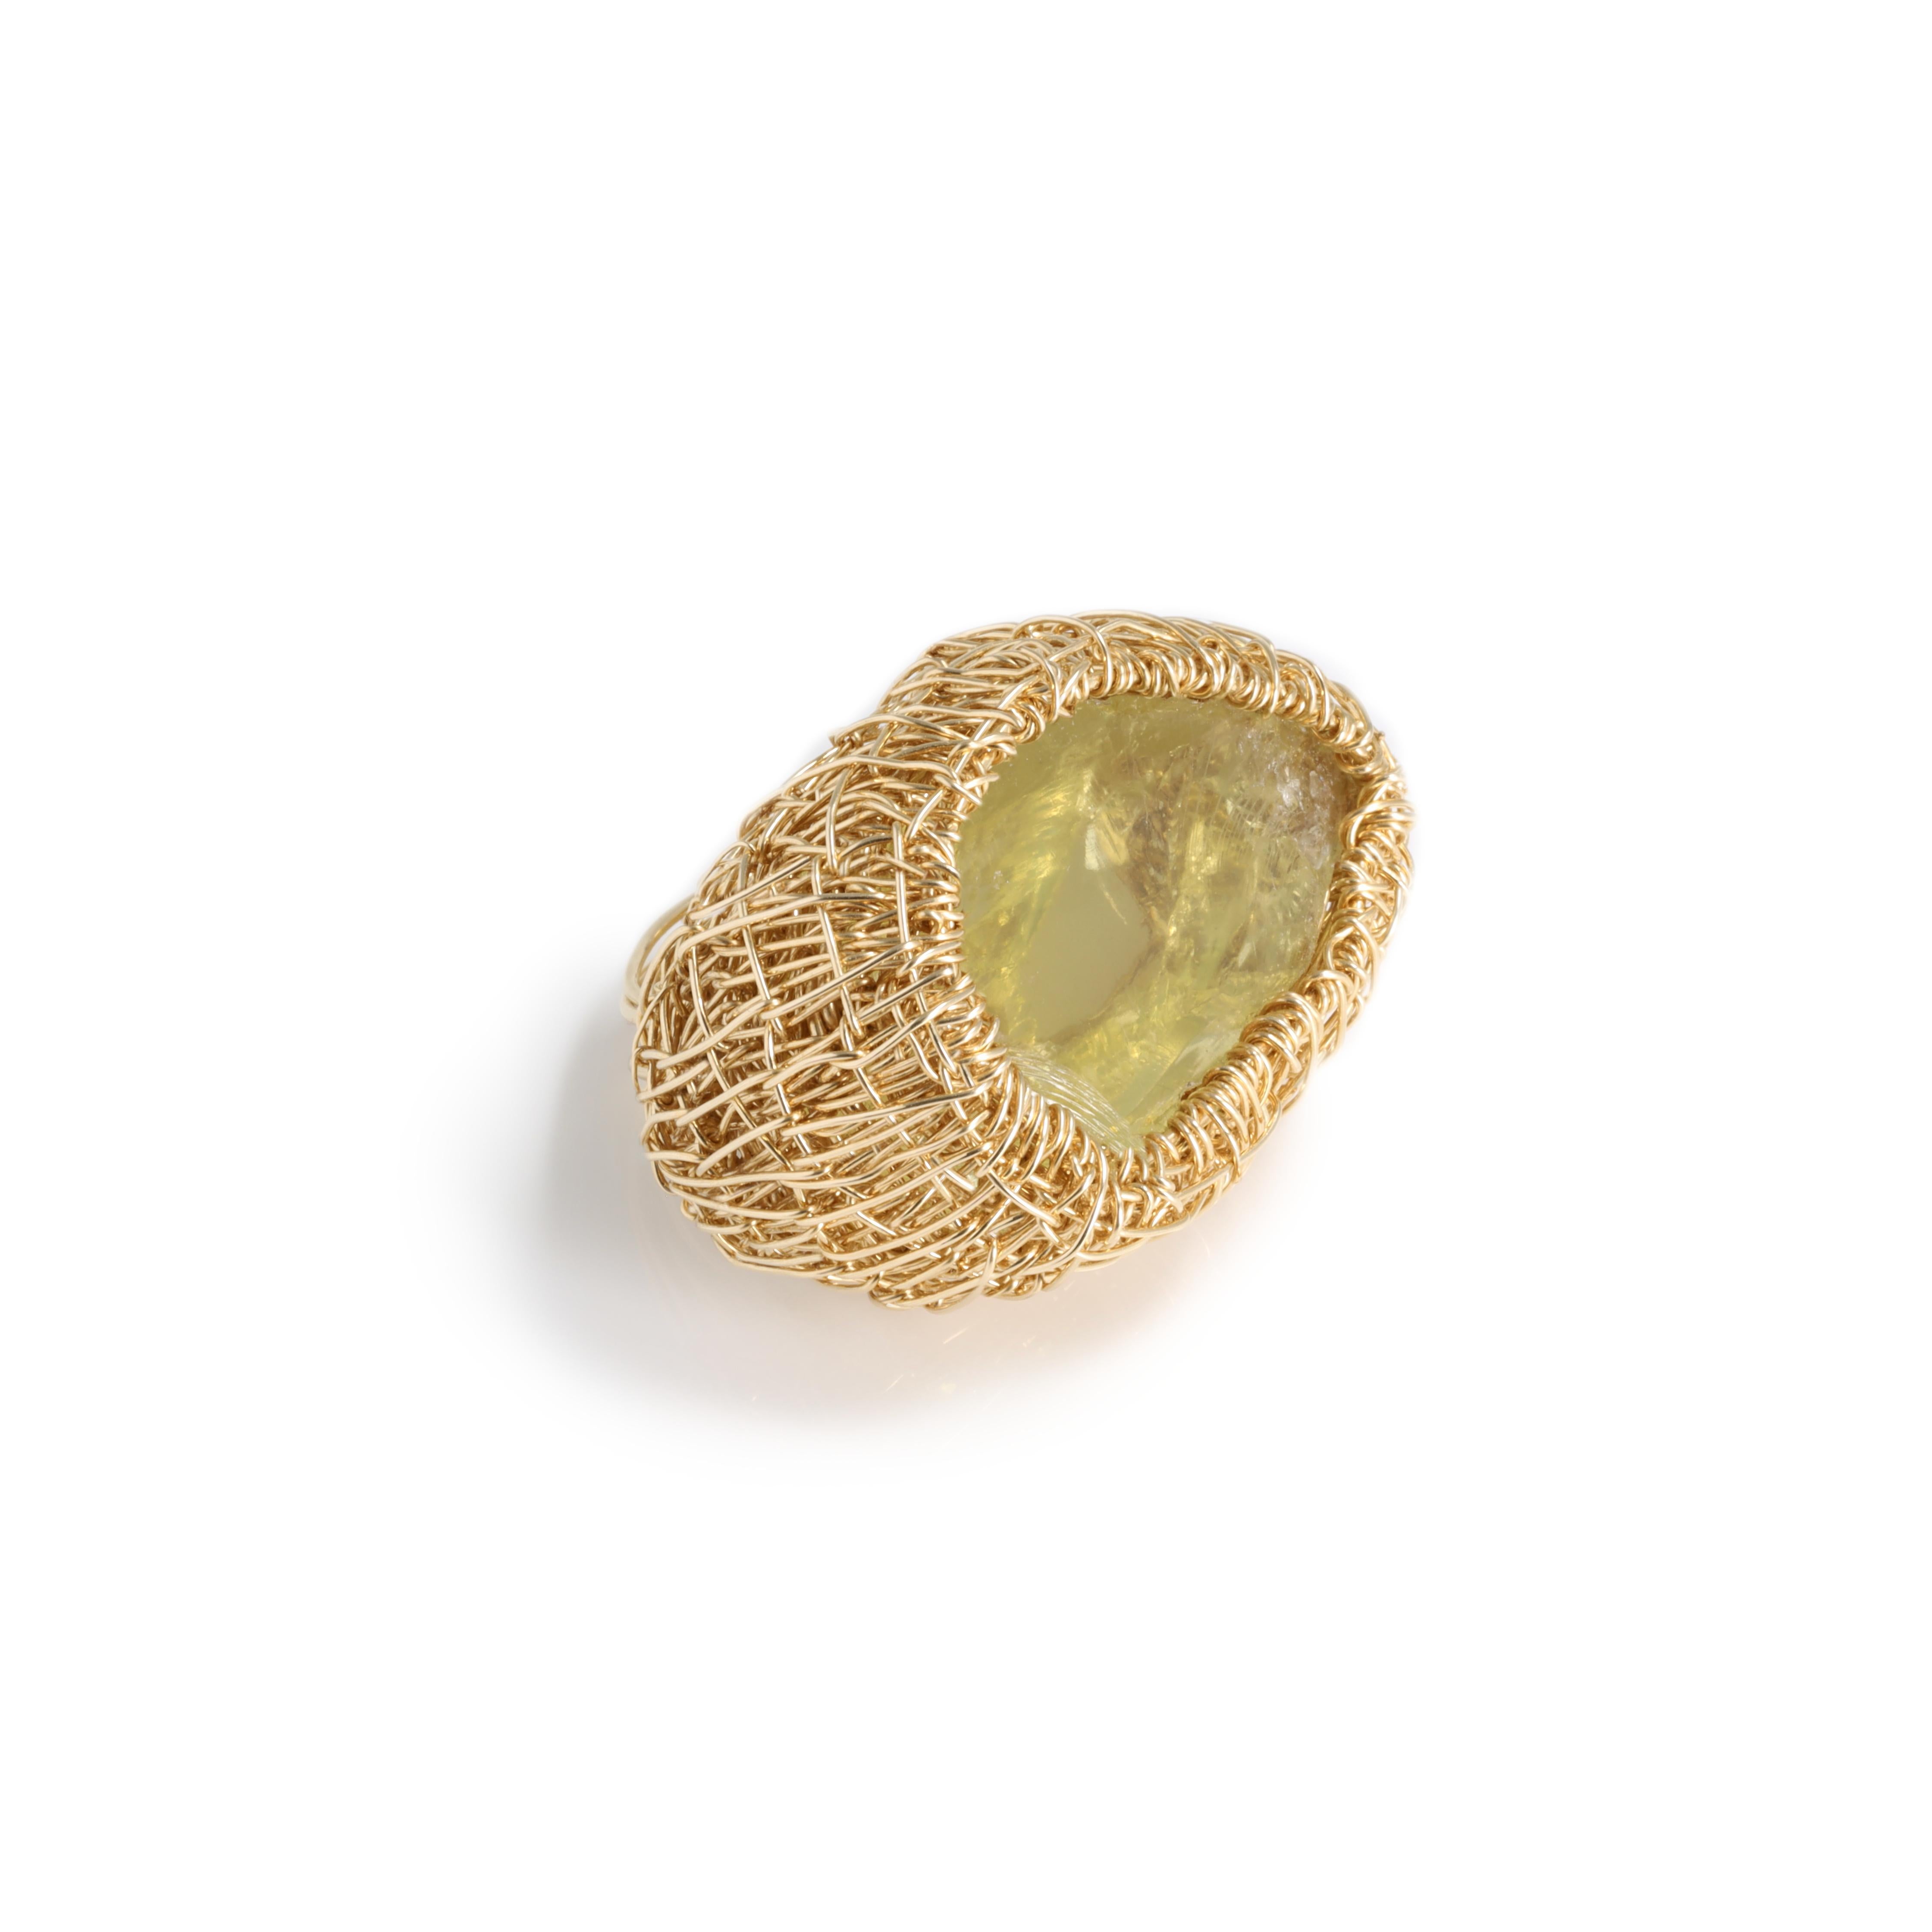 Contemporary Lemon Quartz Raw Stone Cocktail Ring in One-Off 14kt Gold Filled by the Artist For Sale